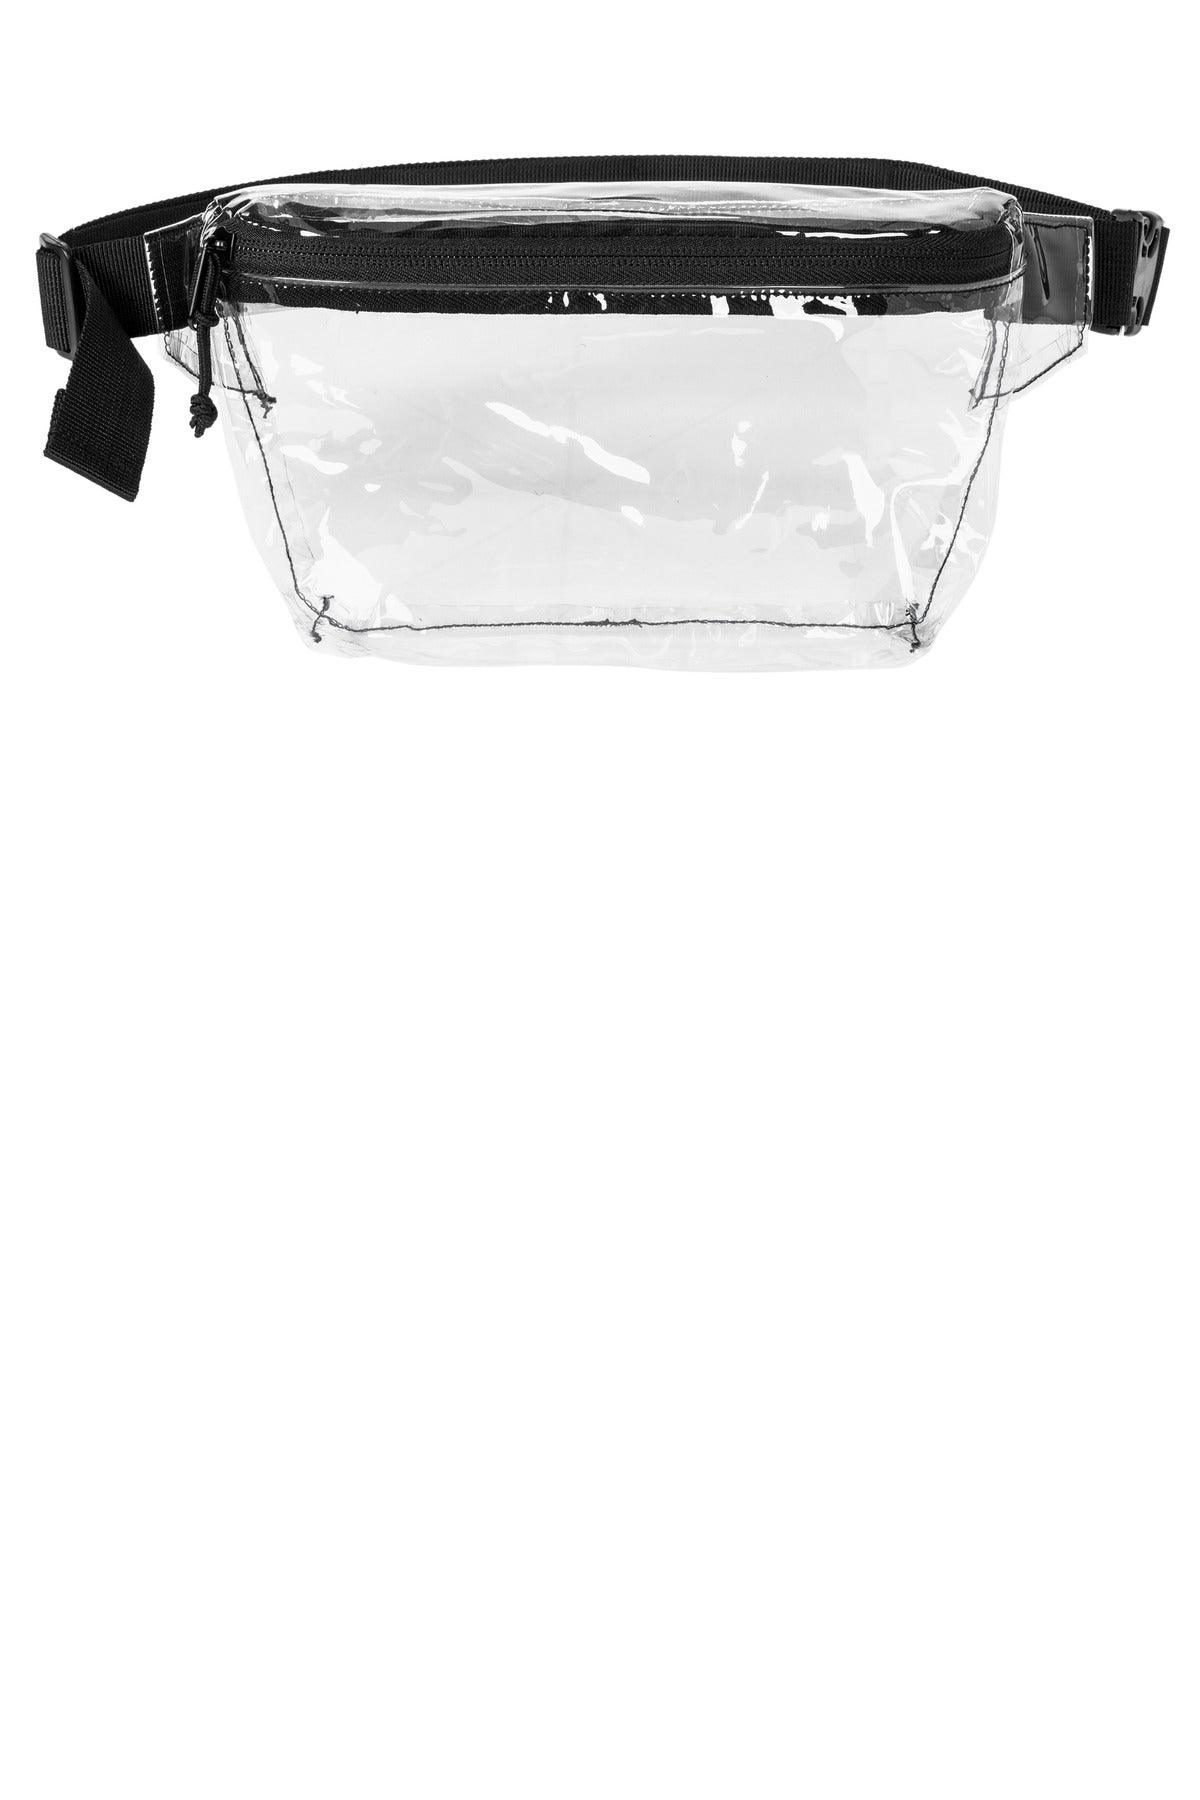 Port Authority Clear Hip Pack BG930 - Dresses Max